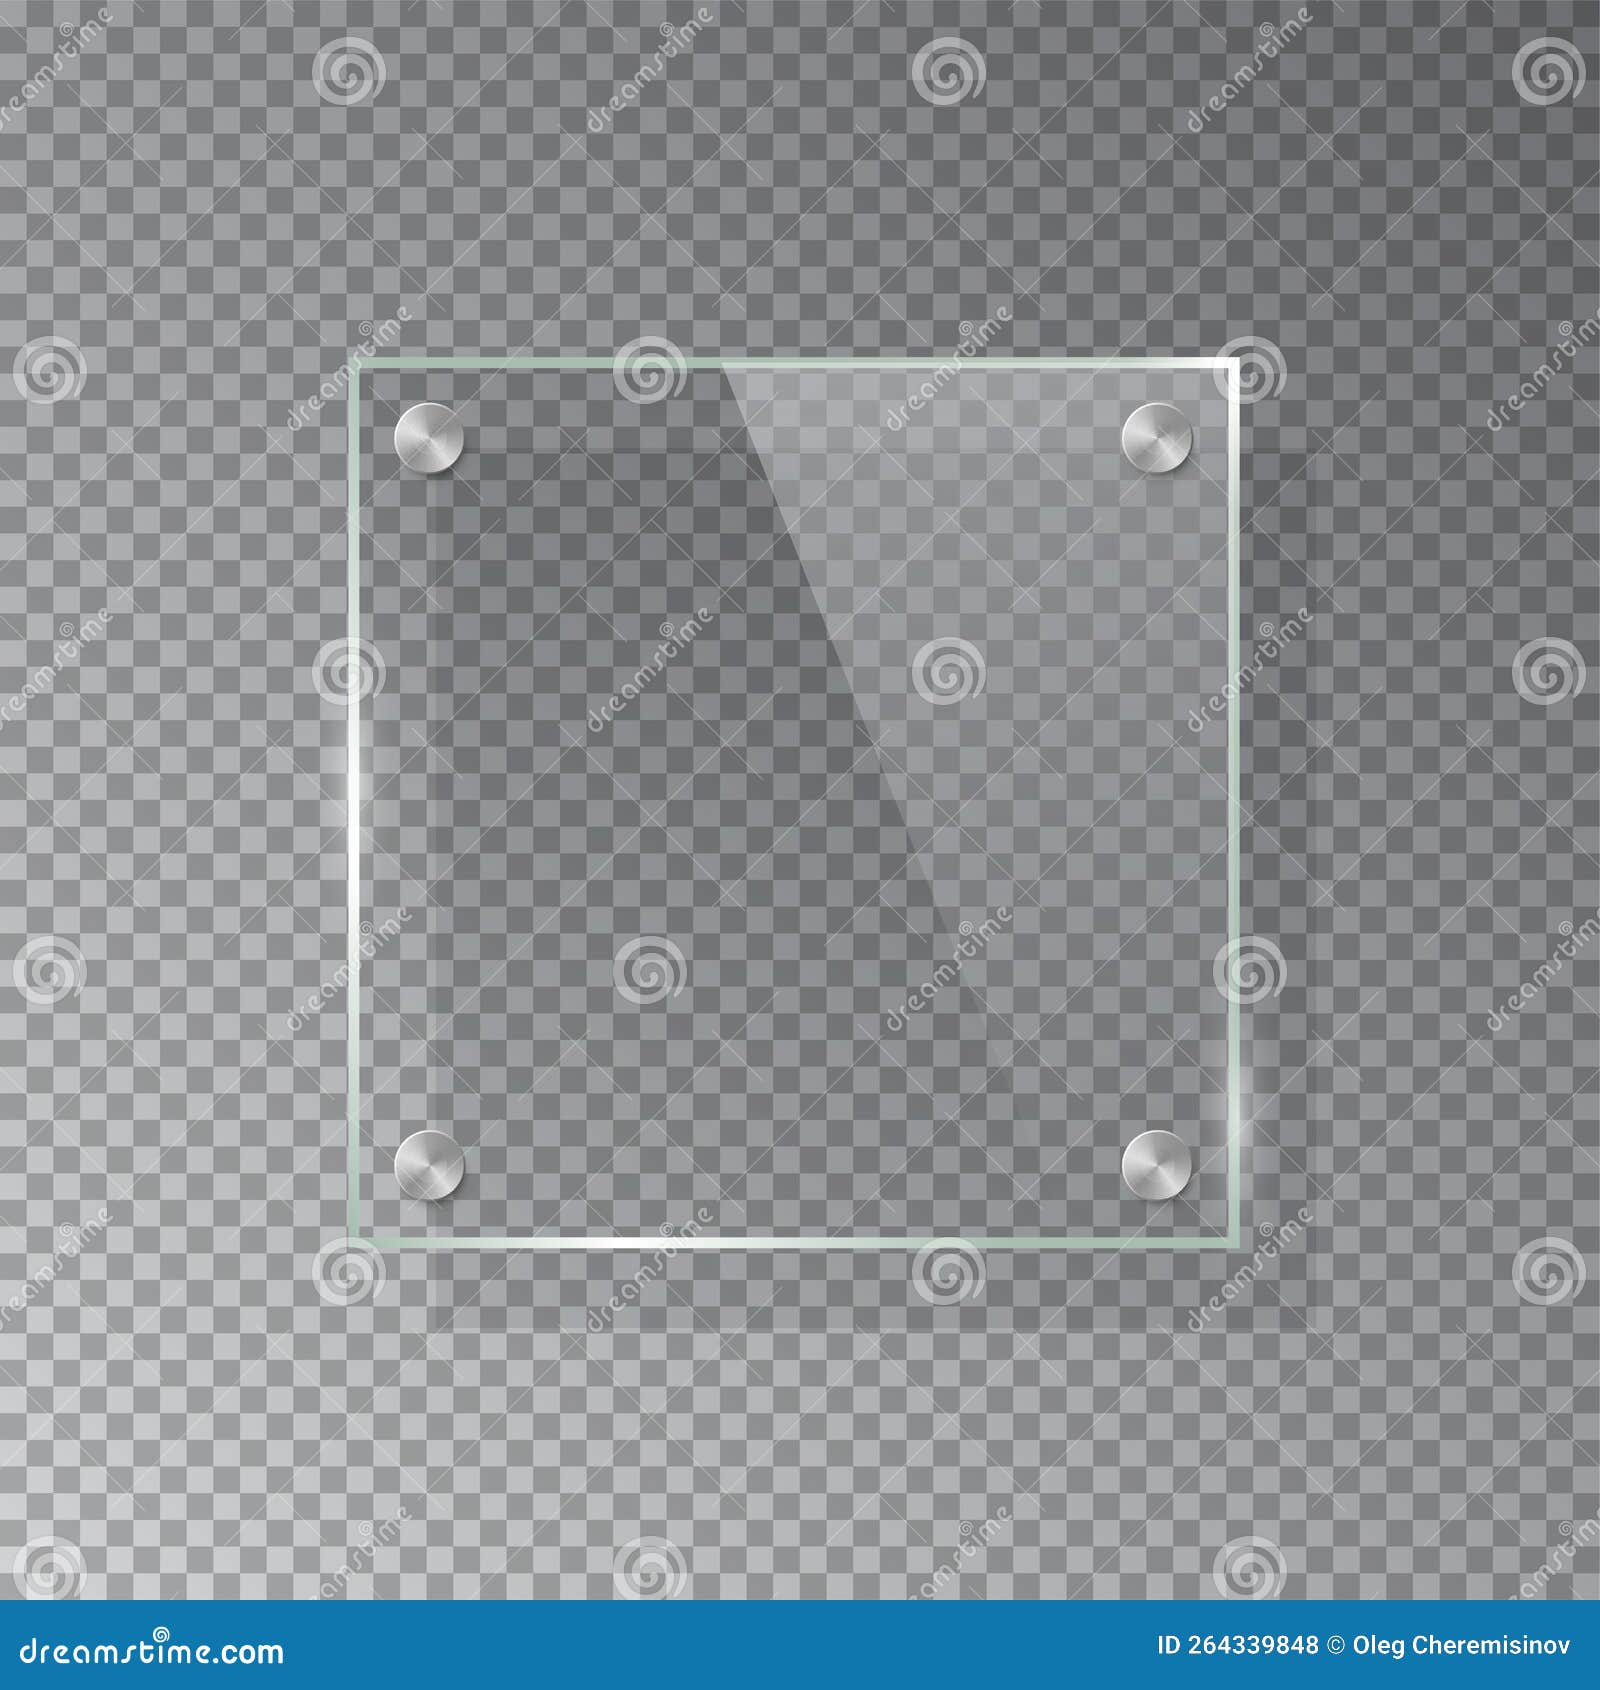 Free Vector  Realistic vector metal plate. isolated on transparent  background.